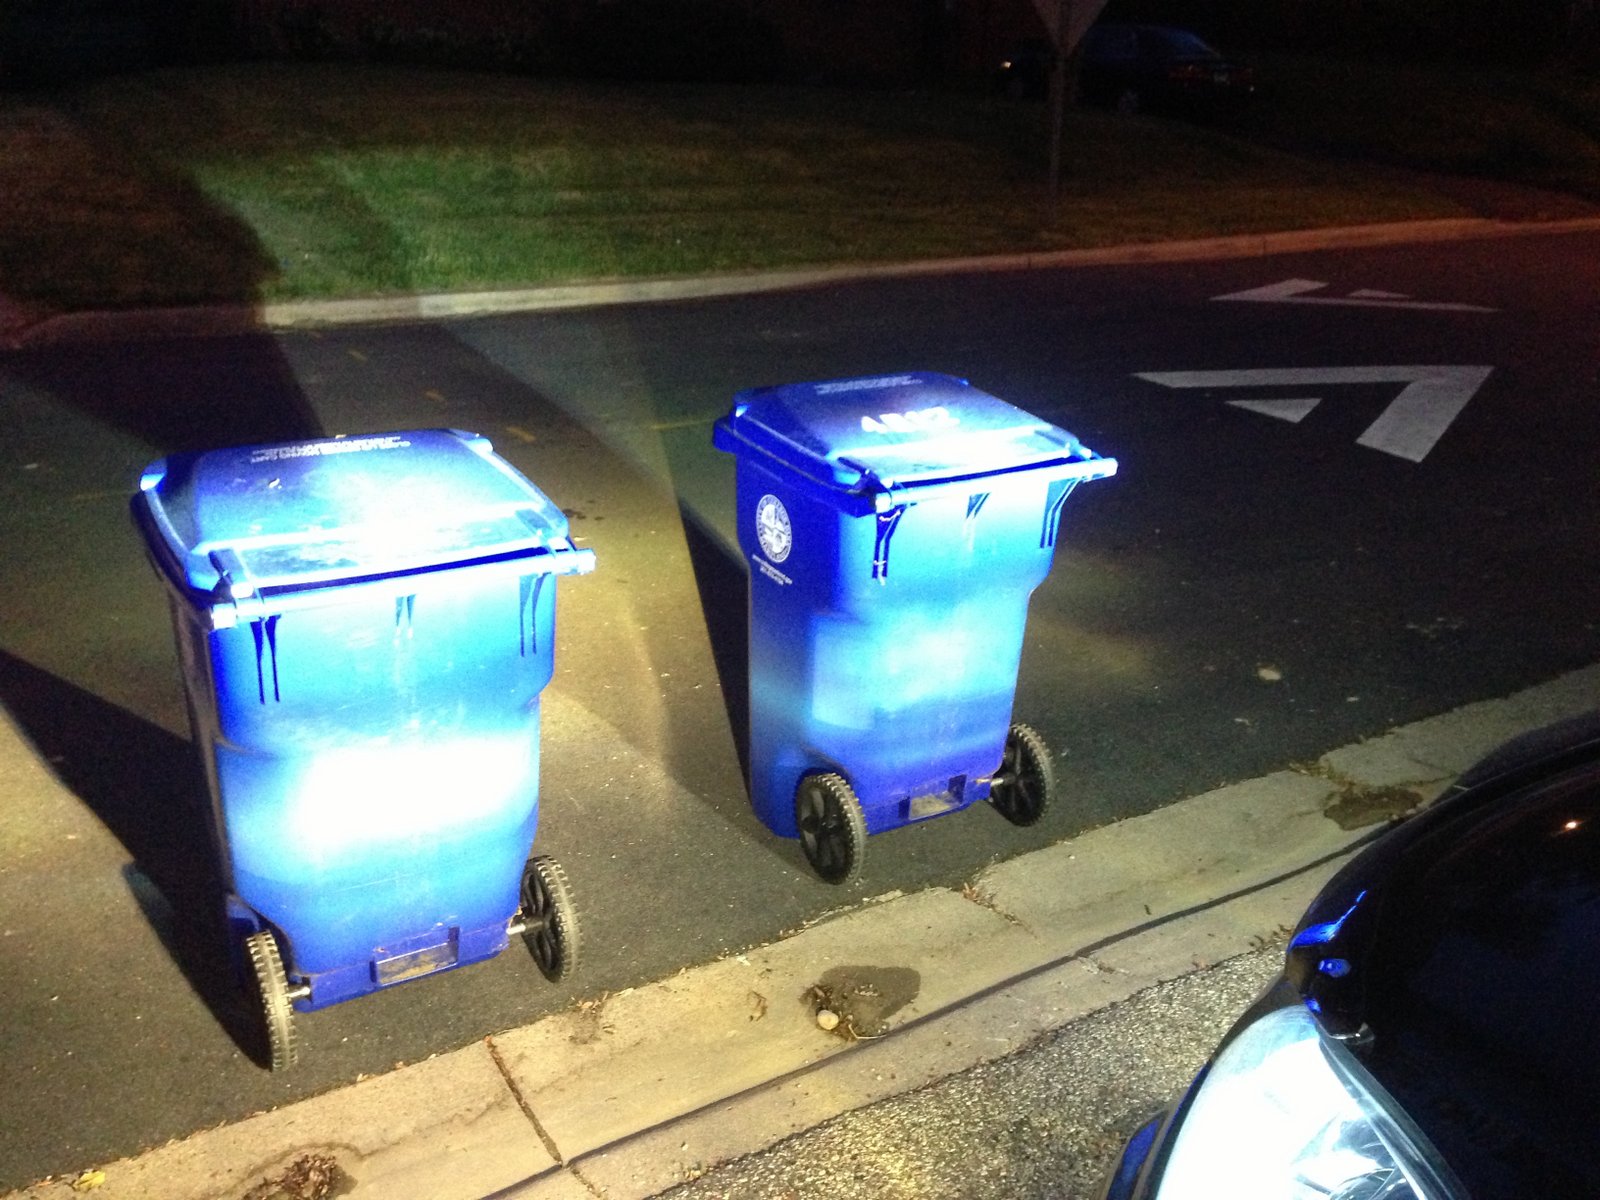 Fog beams aimed against twin trash bins for preliminary height matching.